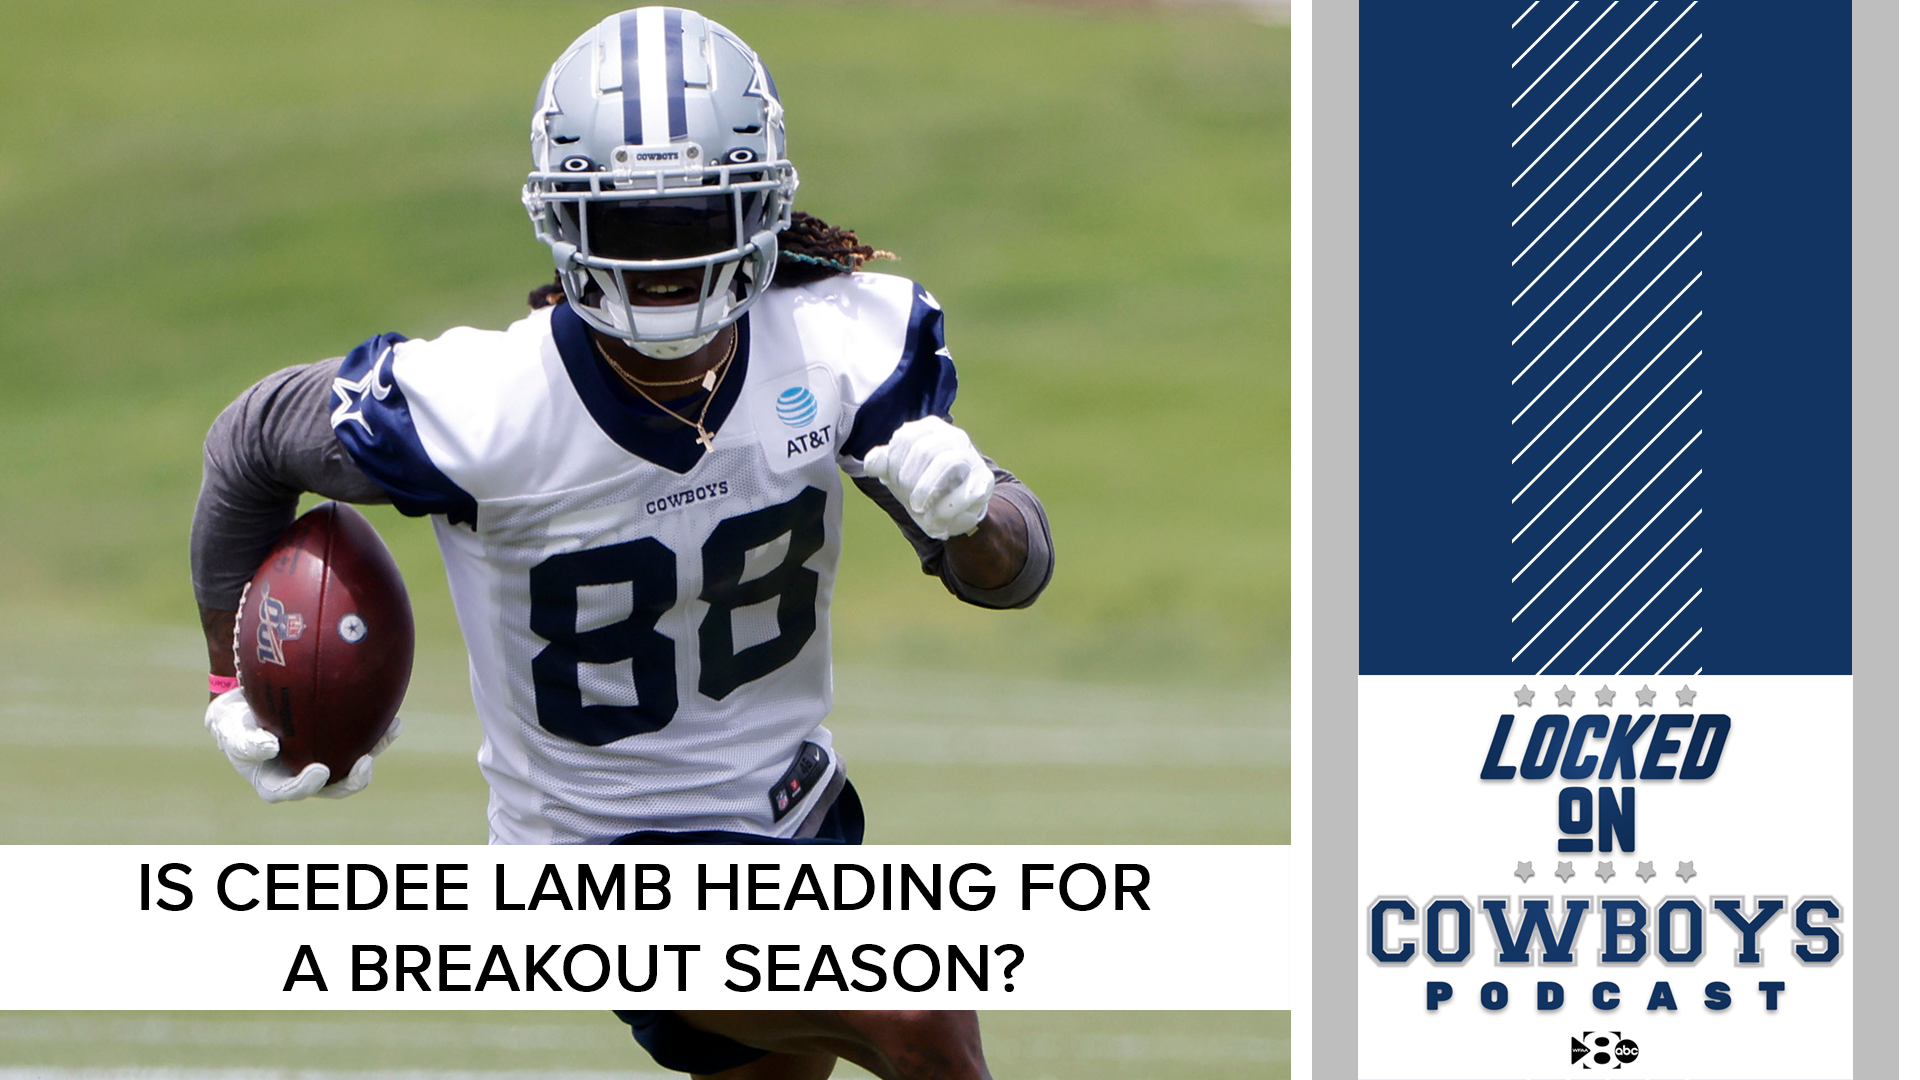 Micah Parsons and CeeDee Lamb are getting a lot of hype this pre-season. Can they live up to it? @Marcus_Mosher and @McCoolBCB let you know on Locked On Cowboys.